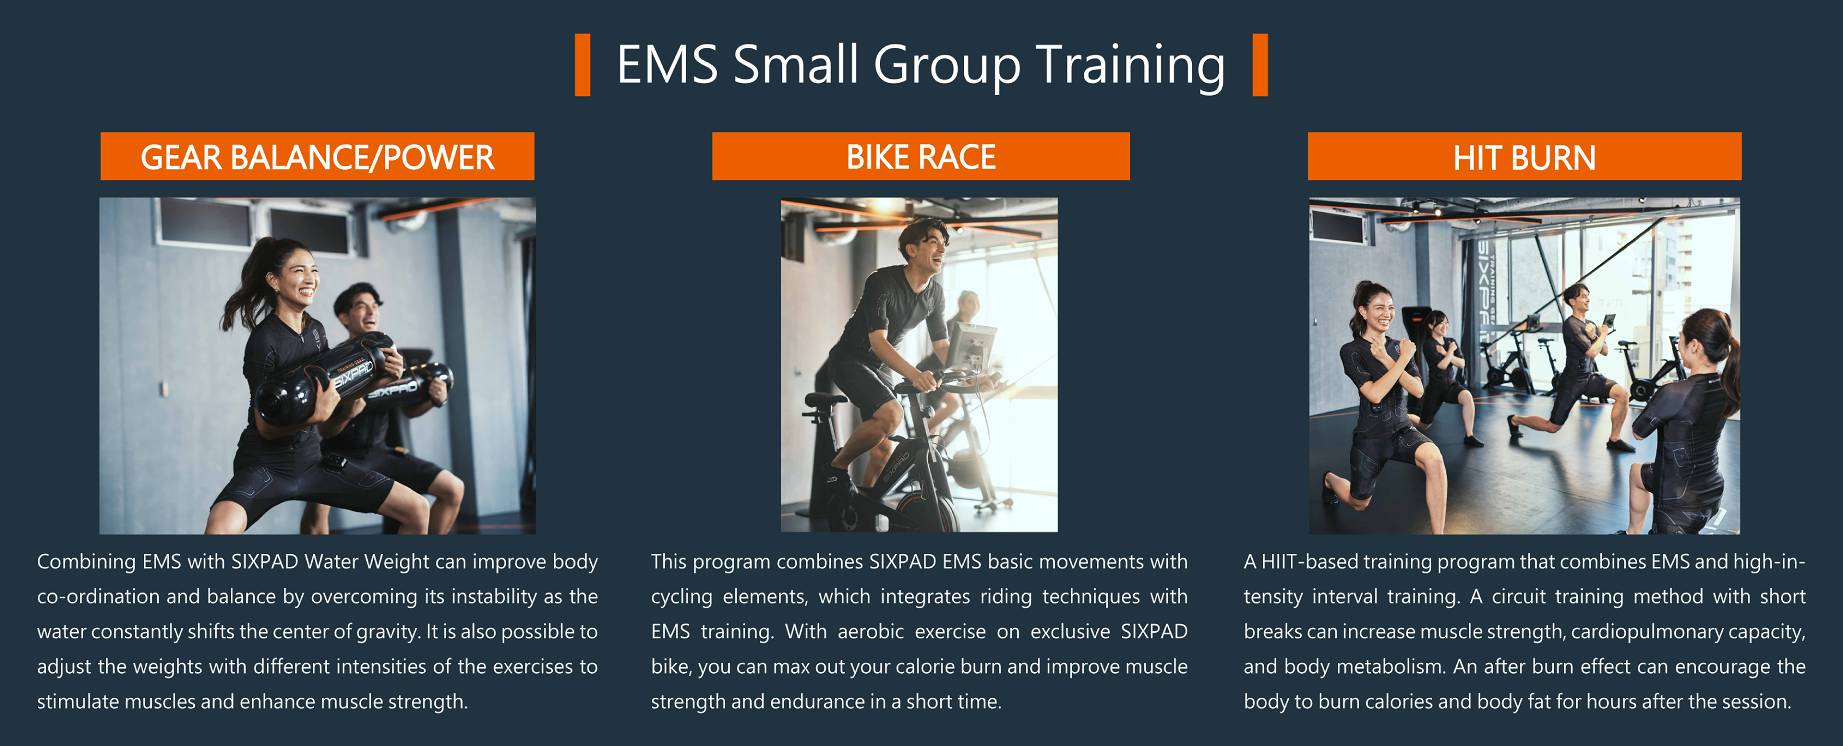 EMS Small Group Training